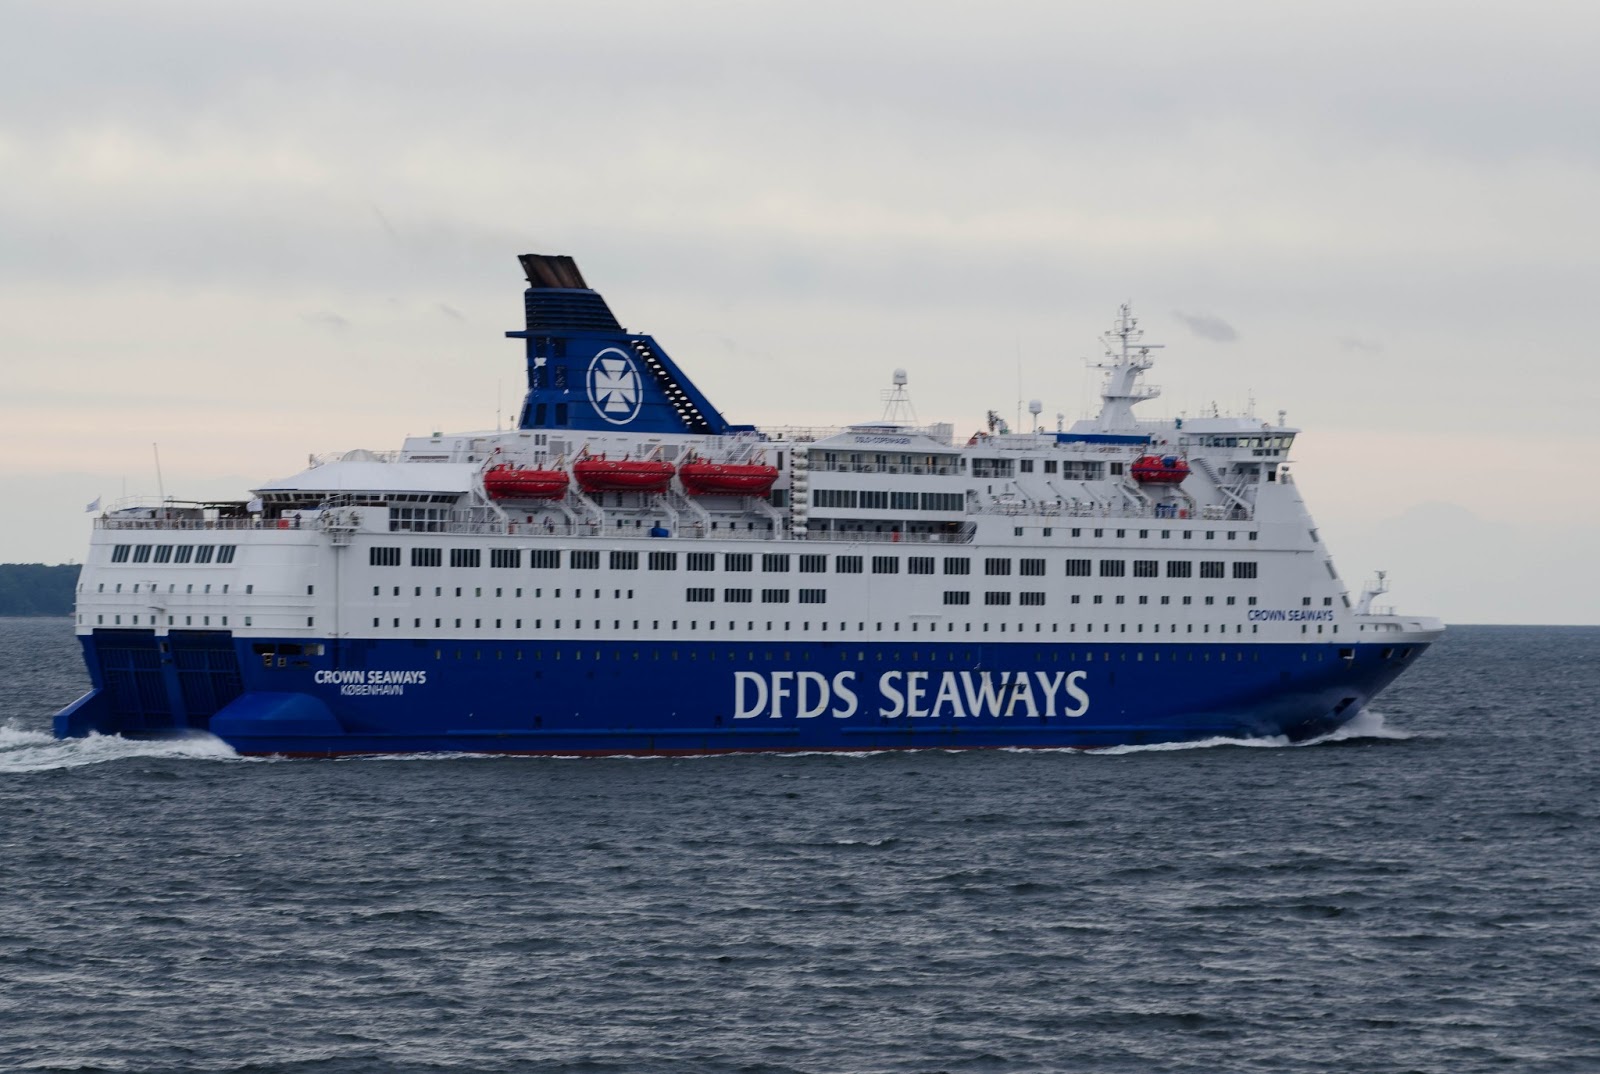 Dfds crown